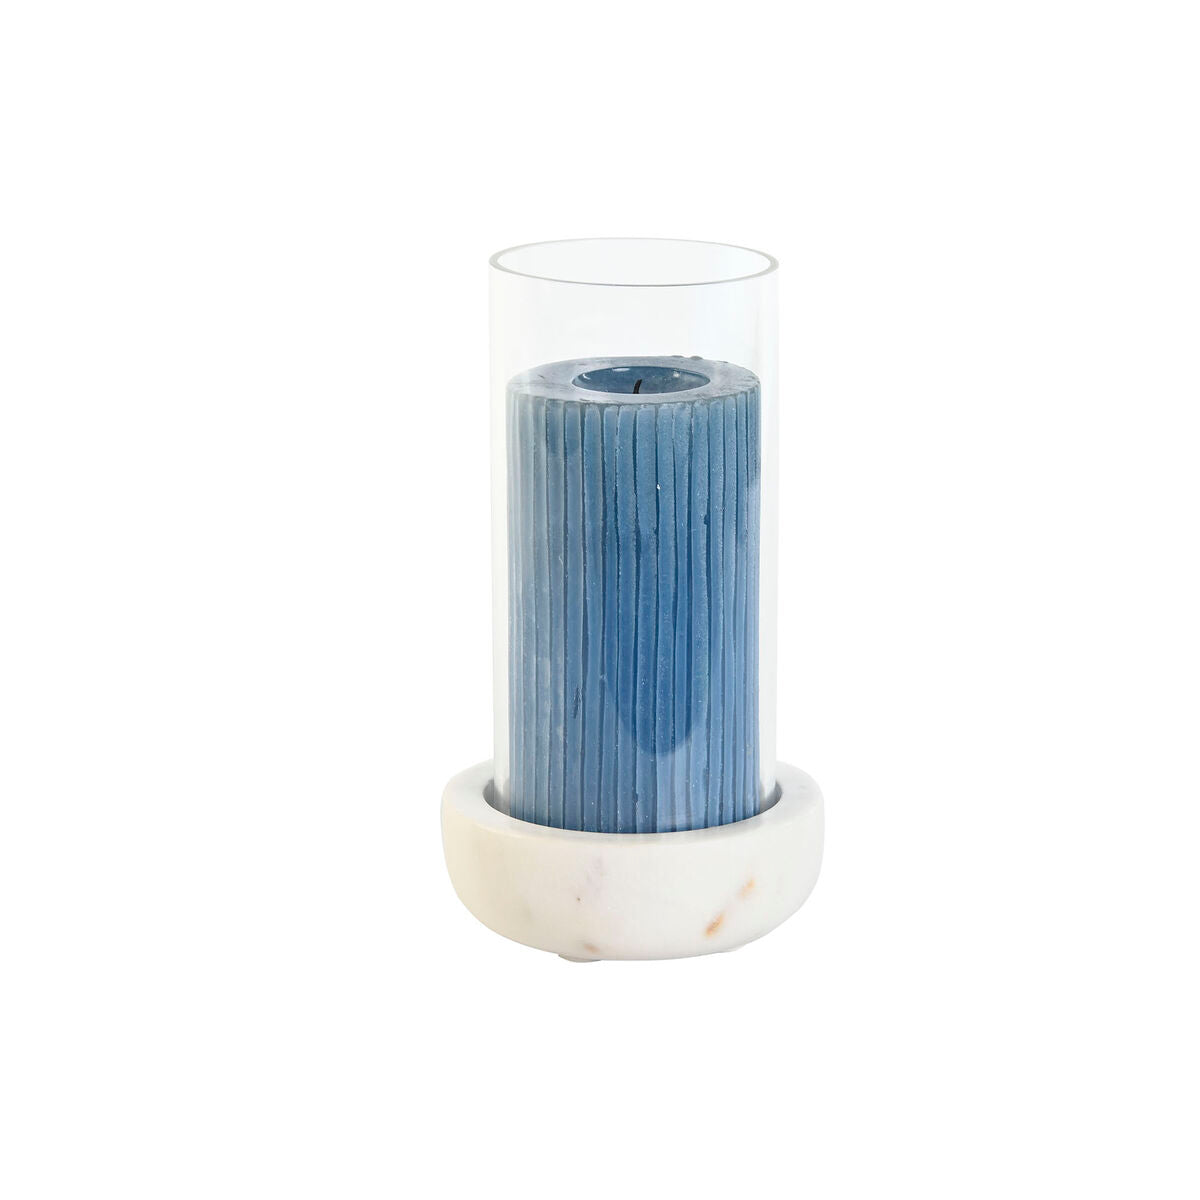 Candleholder Home ESPRIT White Natural Crystal Marble 10 x 10 x 18 cm